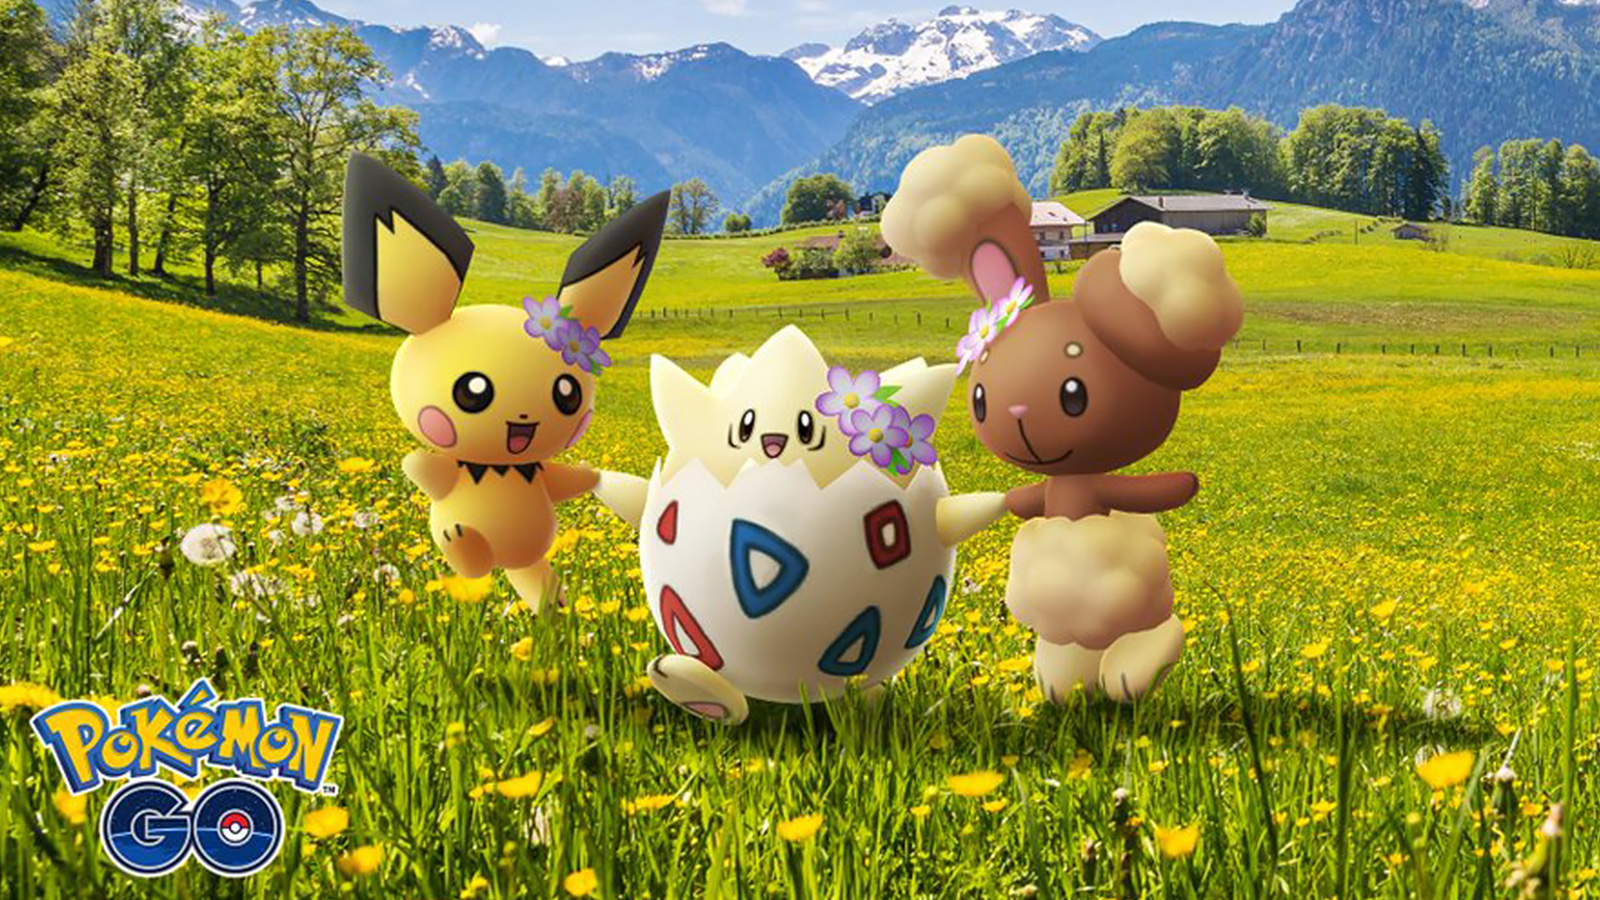 Pikachu and other Pokemon in a field